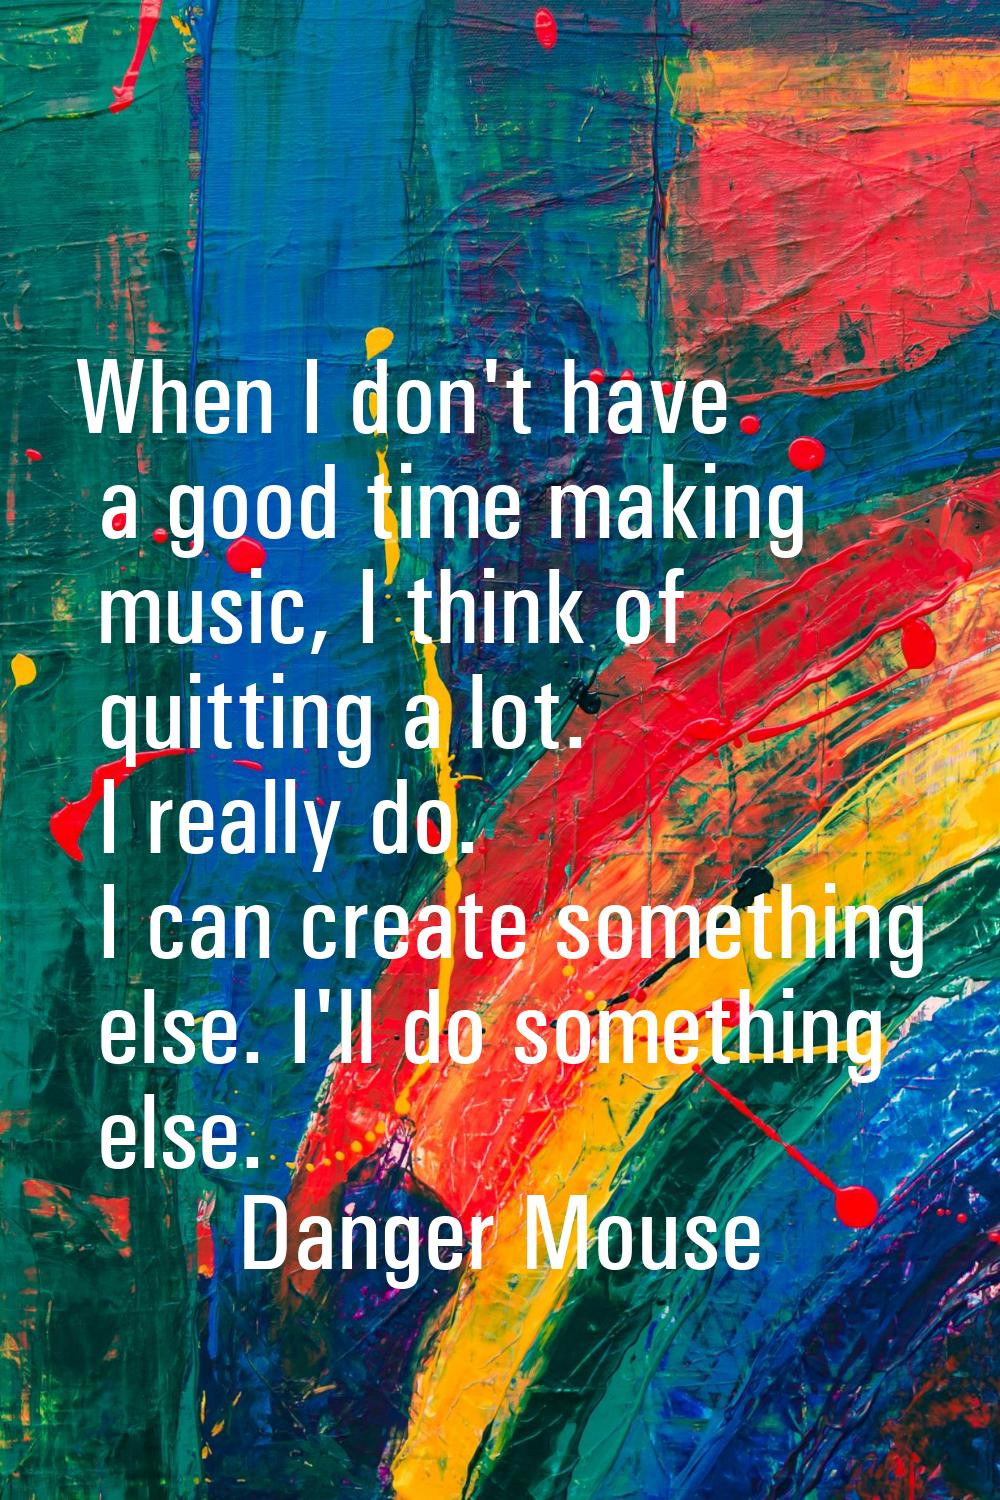 When I don't have a good time making music, I think of quitting a lot. I really do. I can create so